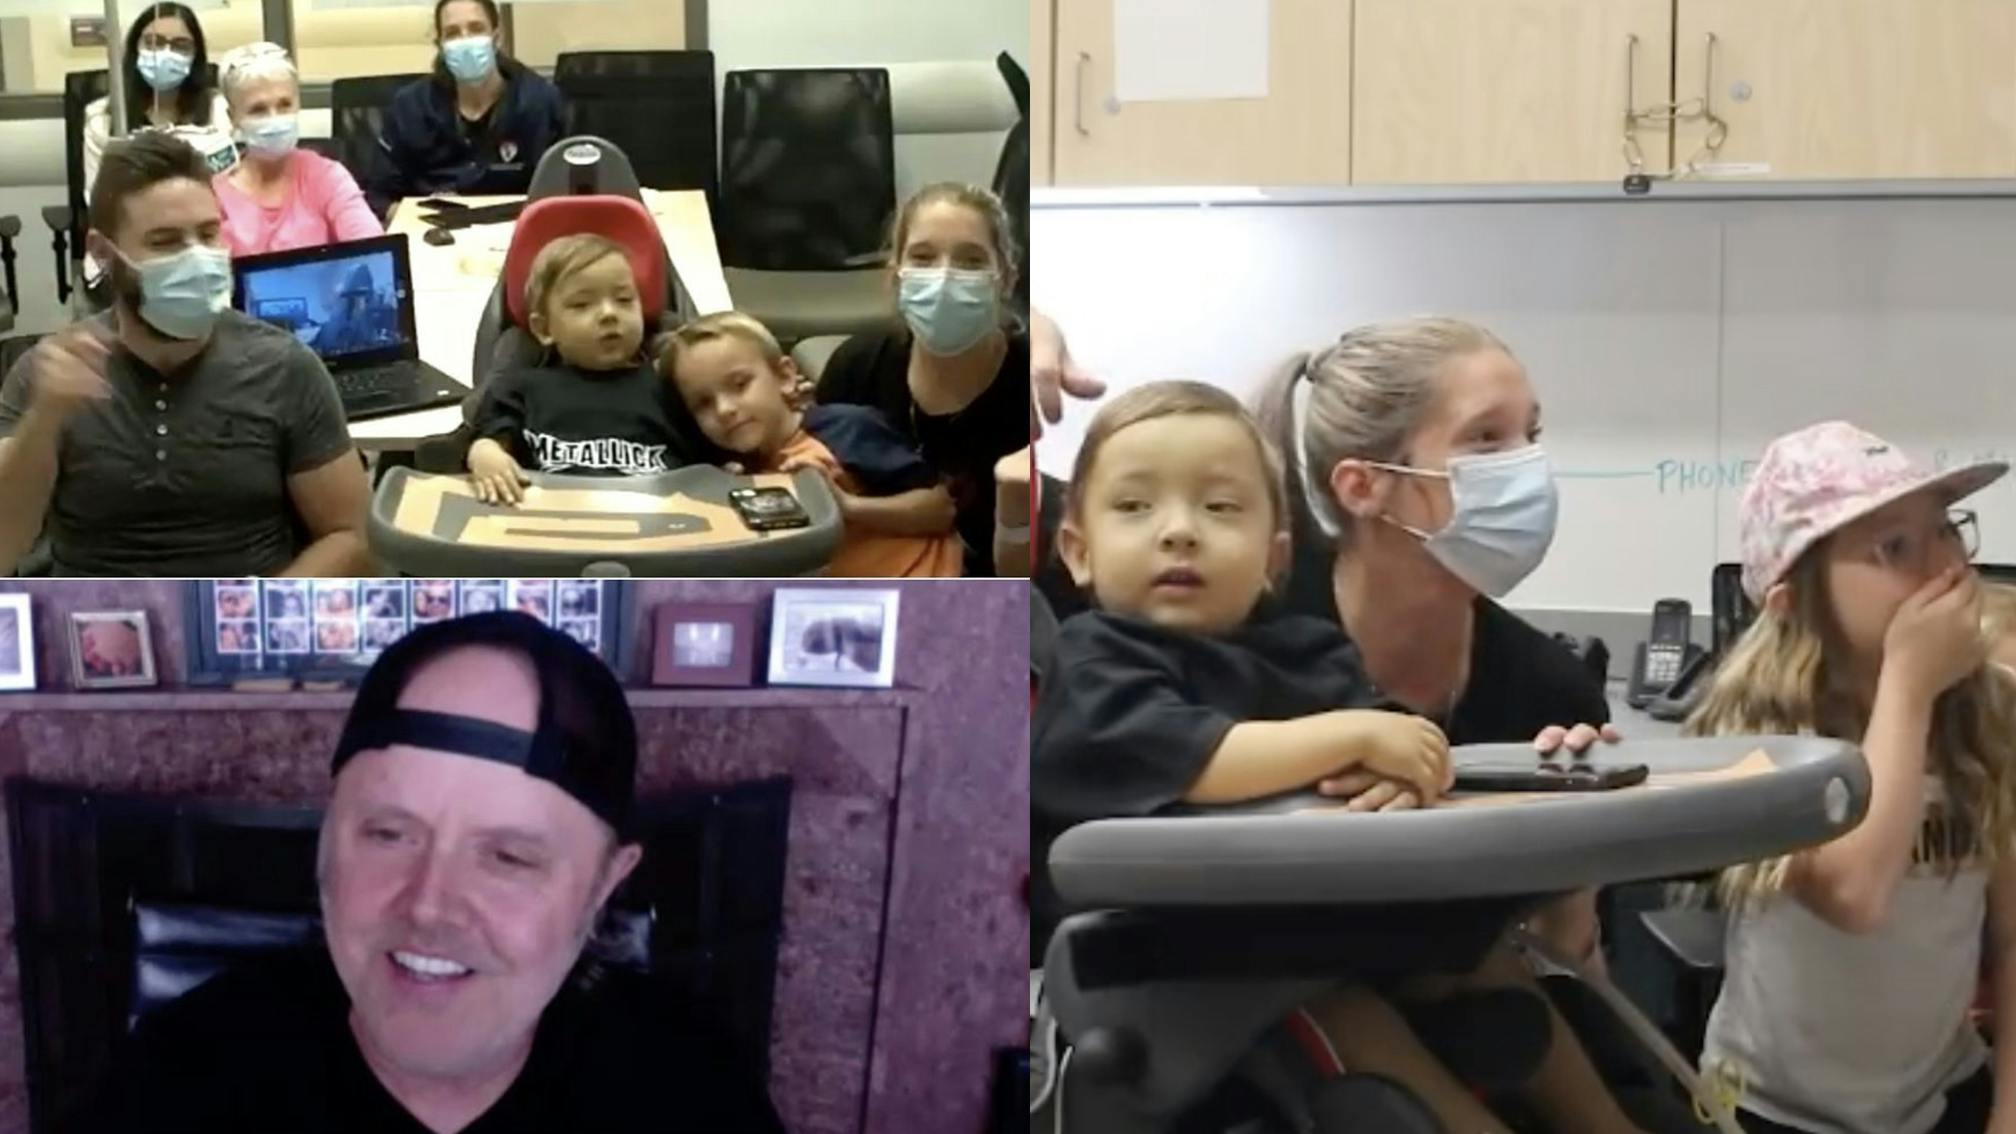 See Lars Ulrich's heartwarming Zoom call to a two-year-old cancer patient